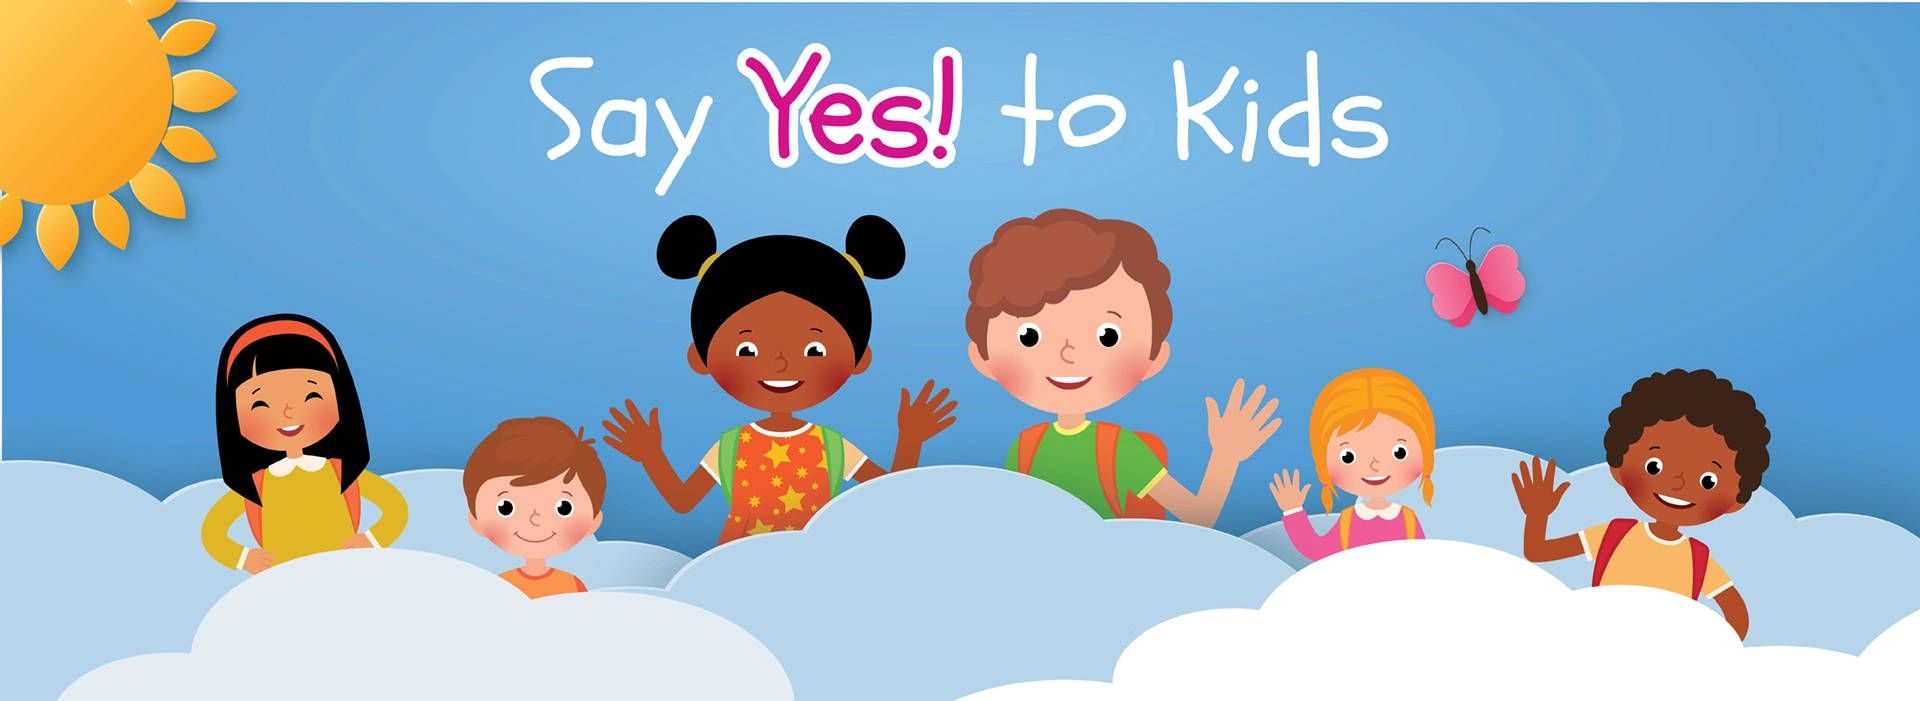 Say Yes! to Kids banner with happy kids playing in the clouds